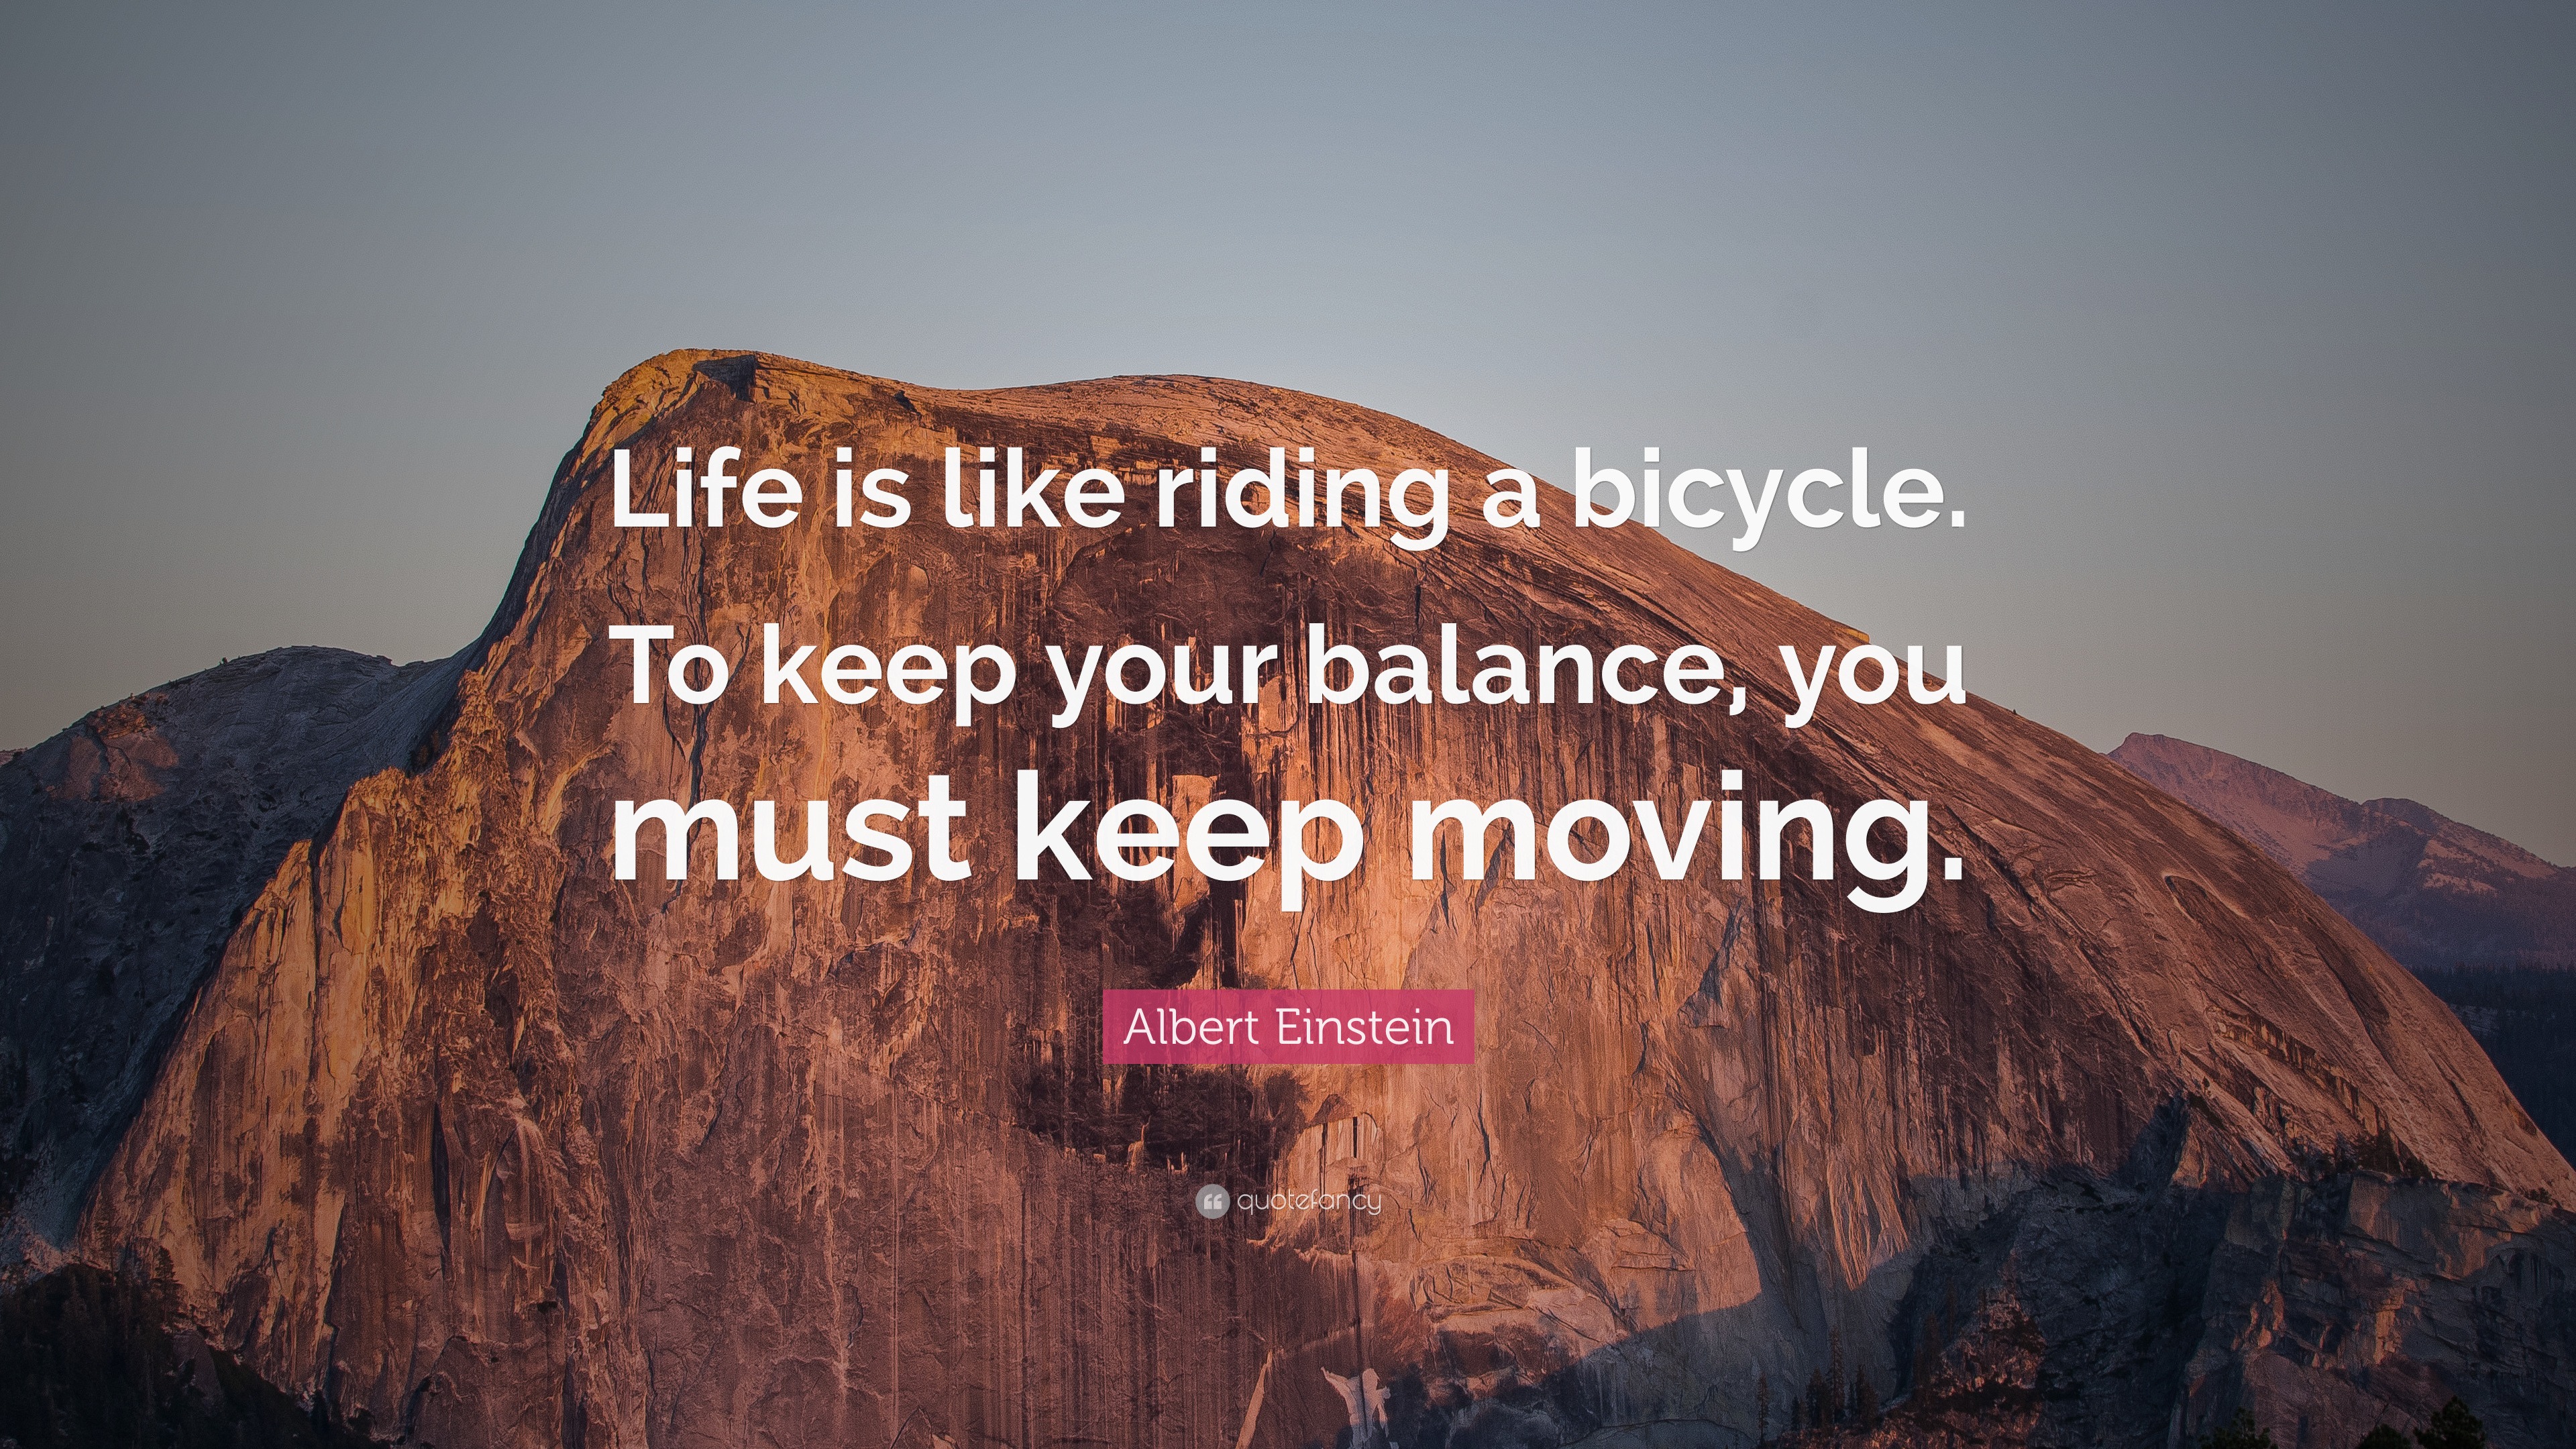 Albert Einstein Quote “Life is like riding a bicycle To keep your balance